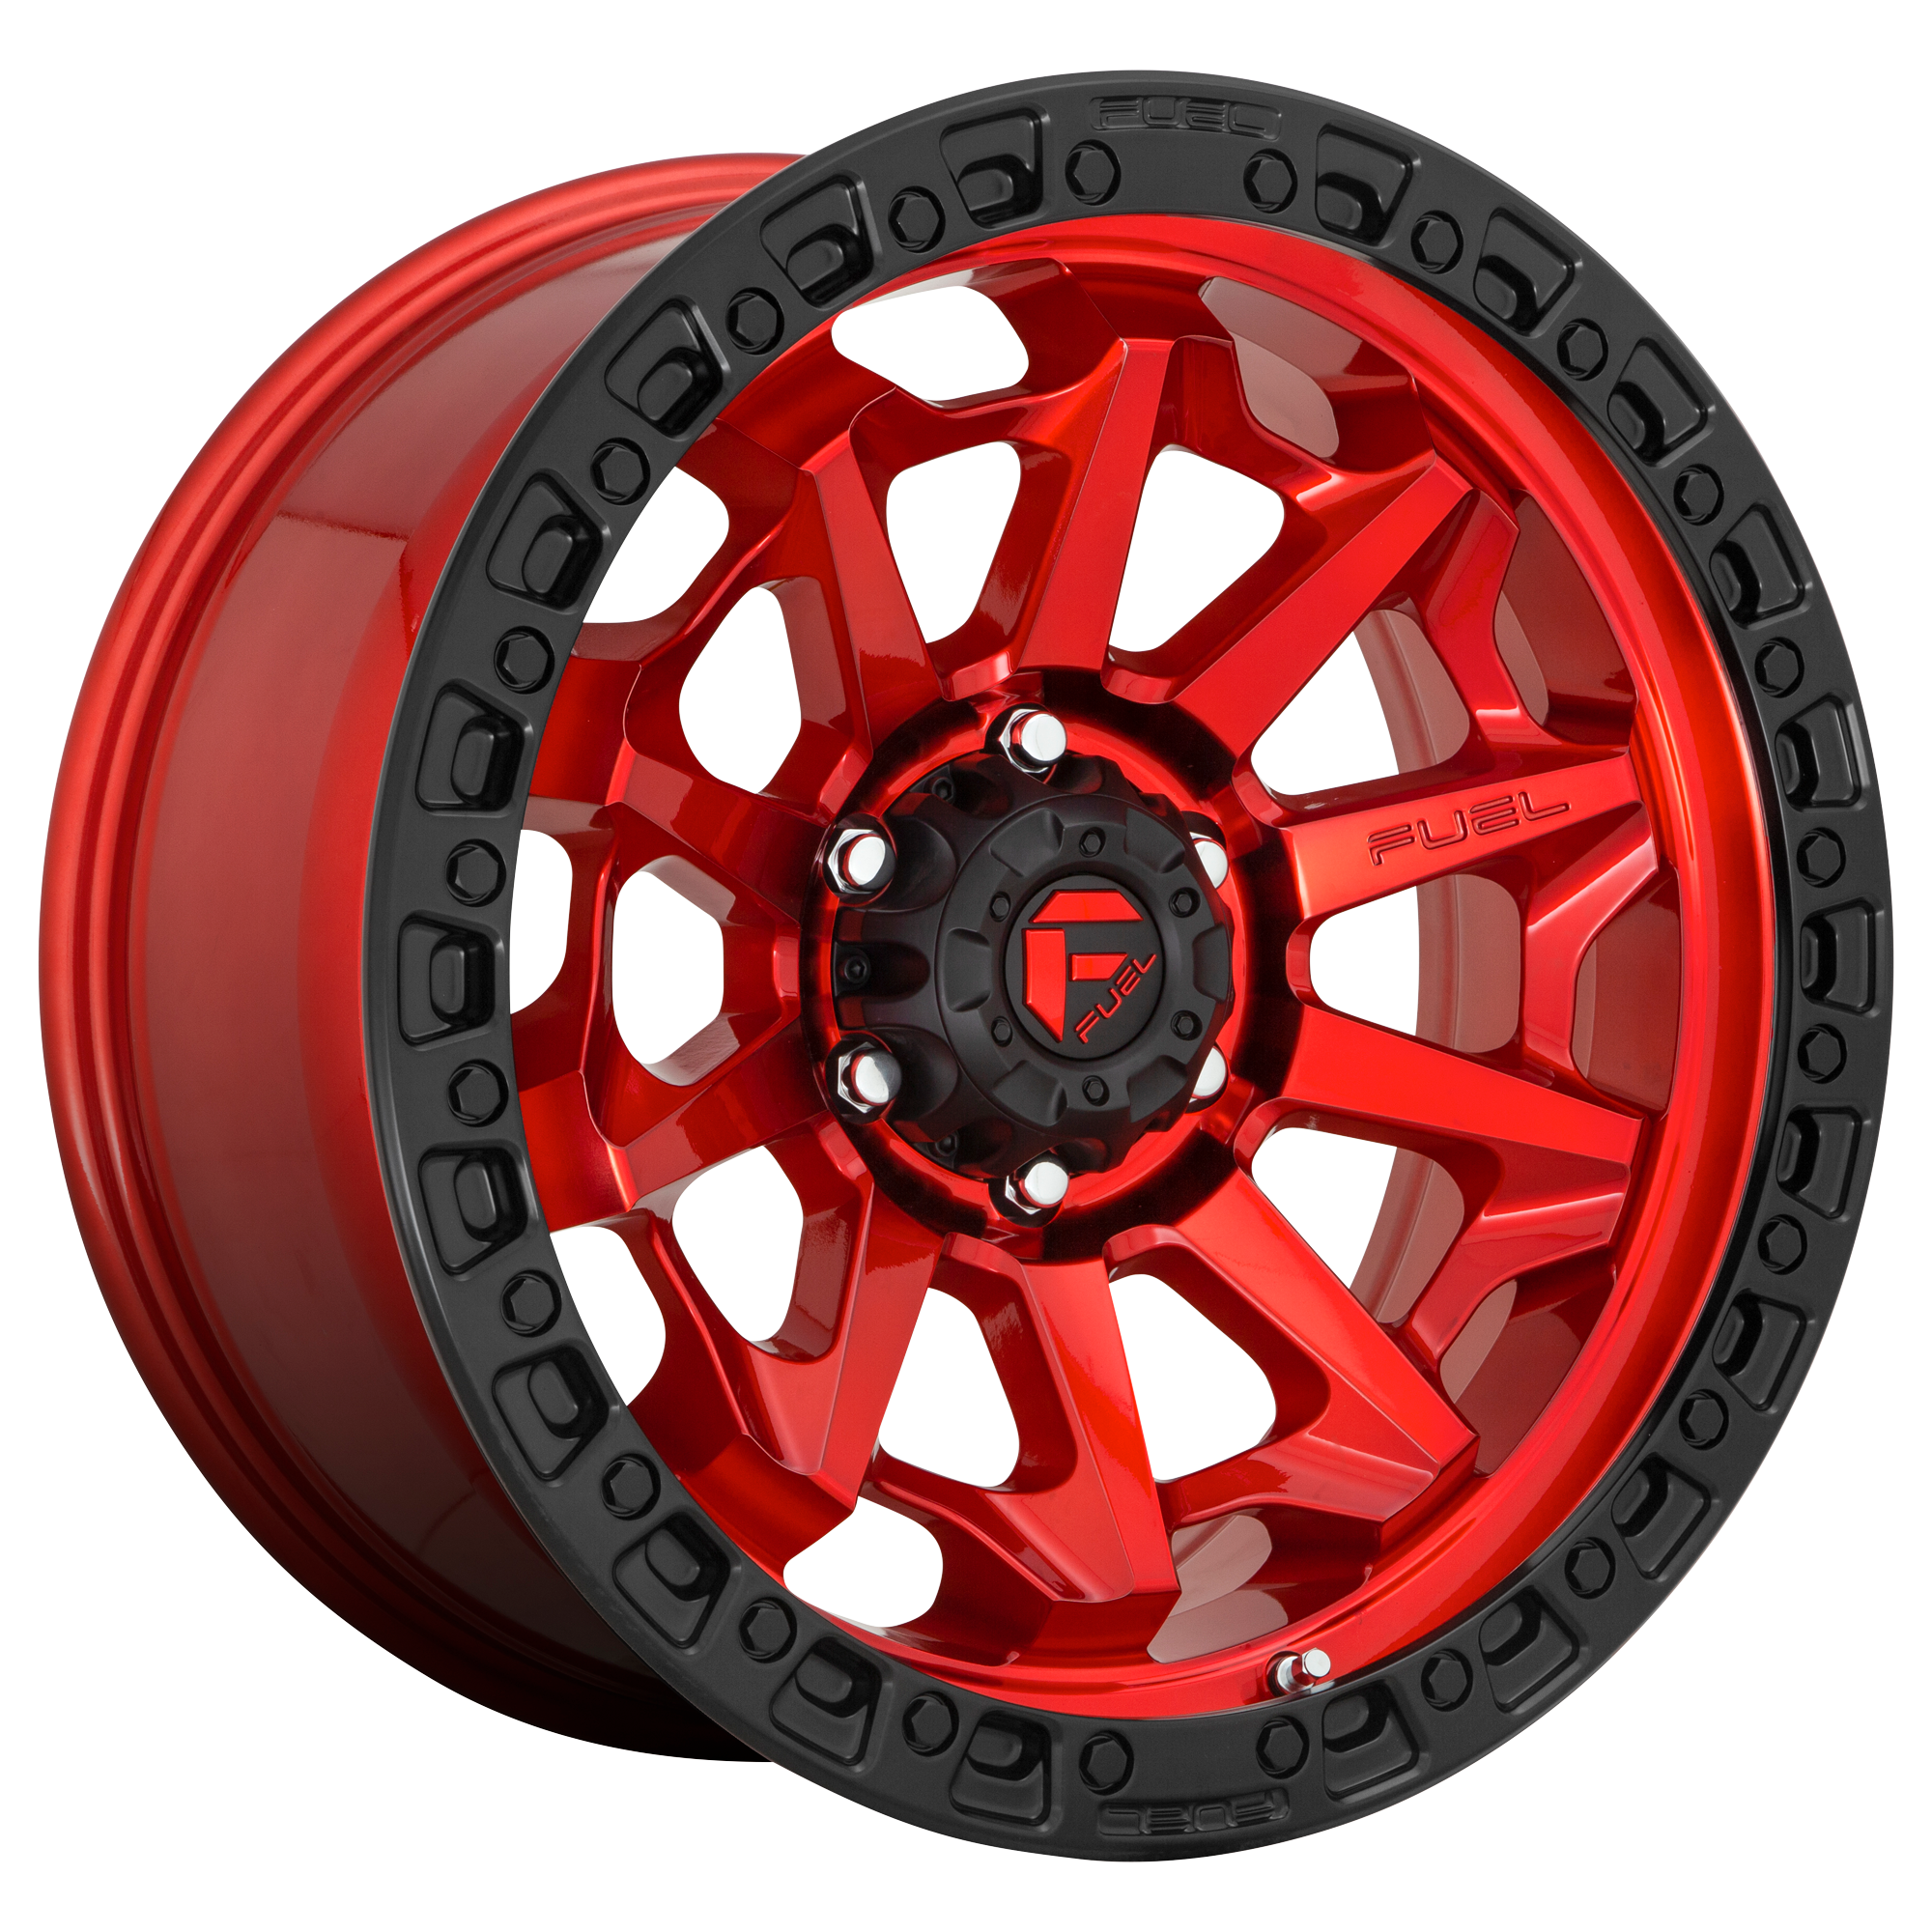 COVERT 20x9 5x150.00 CANDY RED BLACK BEAD RING (20 mm) - Tires and Engine Performance